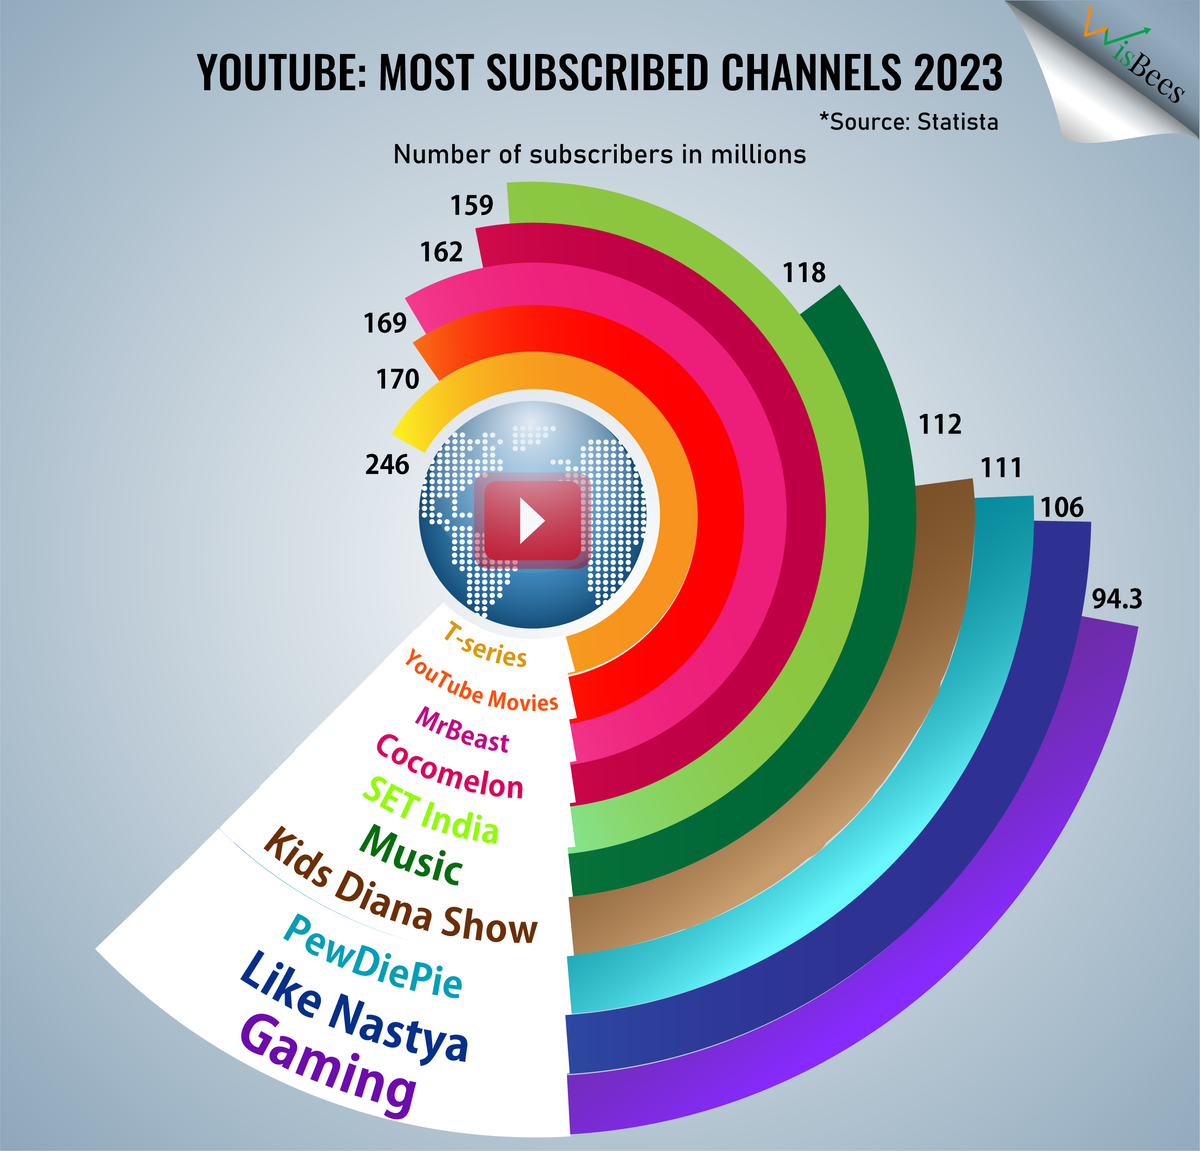 Which  channel have the highest number of subscribers